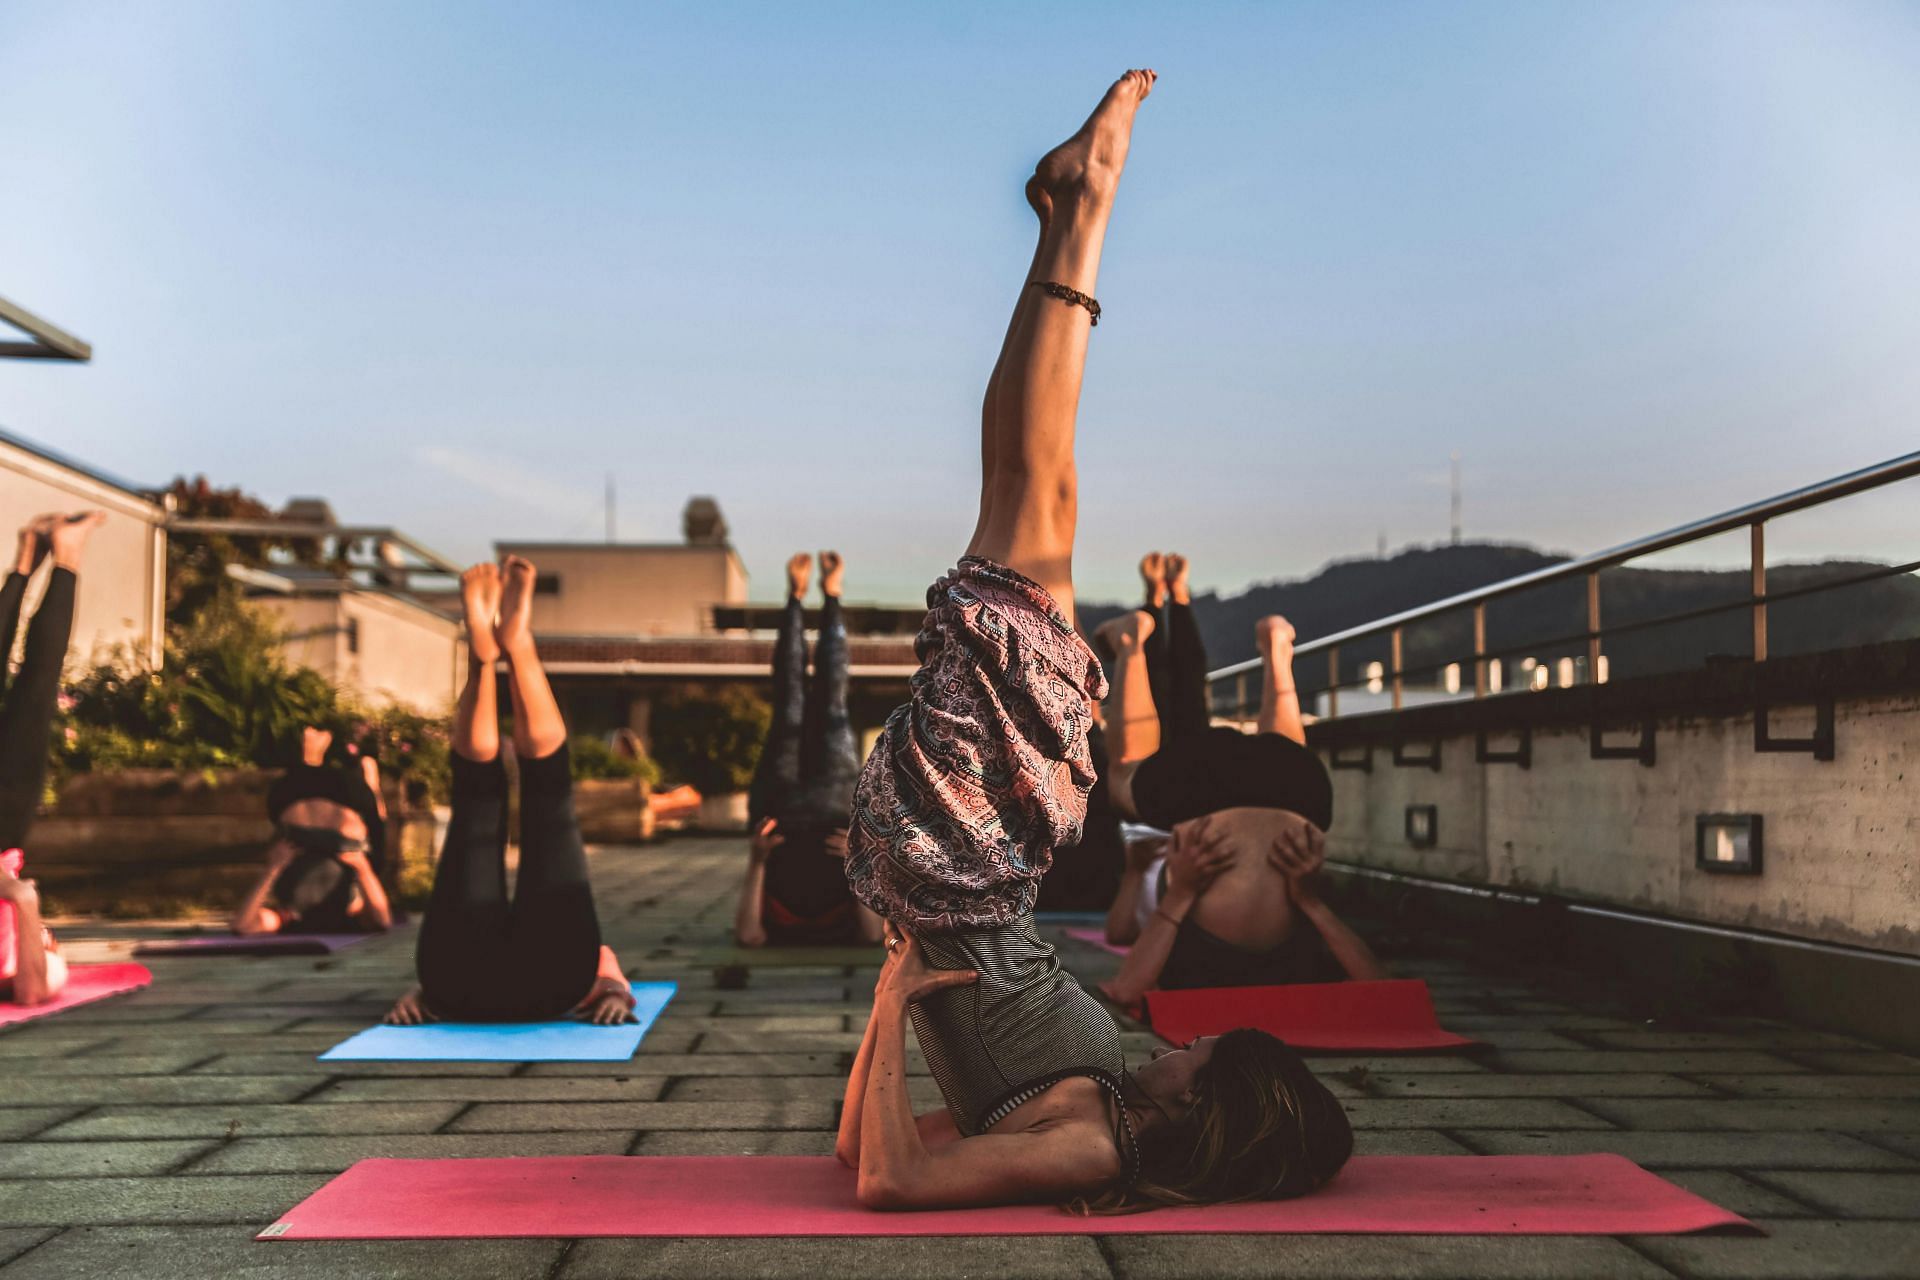 Importance of camel pose as Thanksgiving yoga (image sourced via Pexels / Photo by Kindel Media)